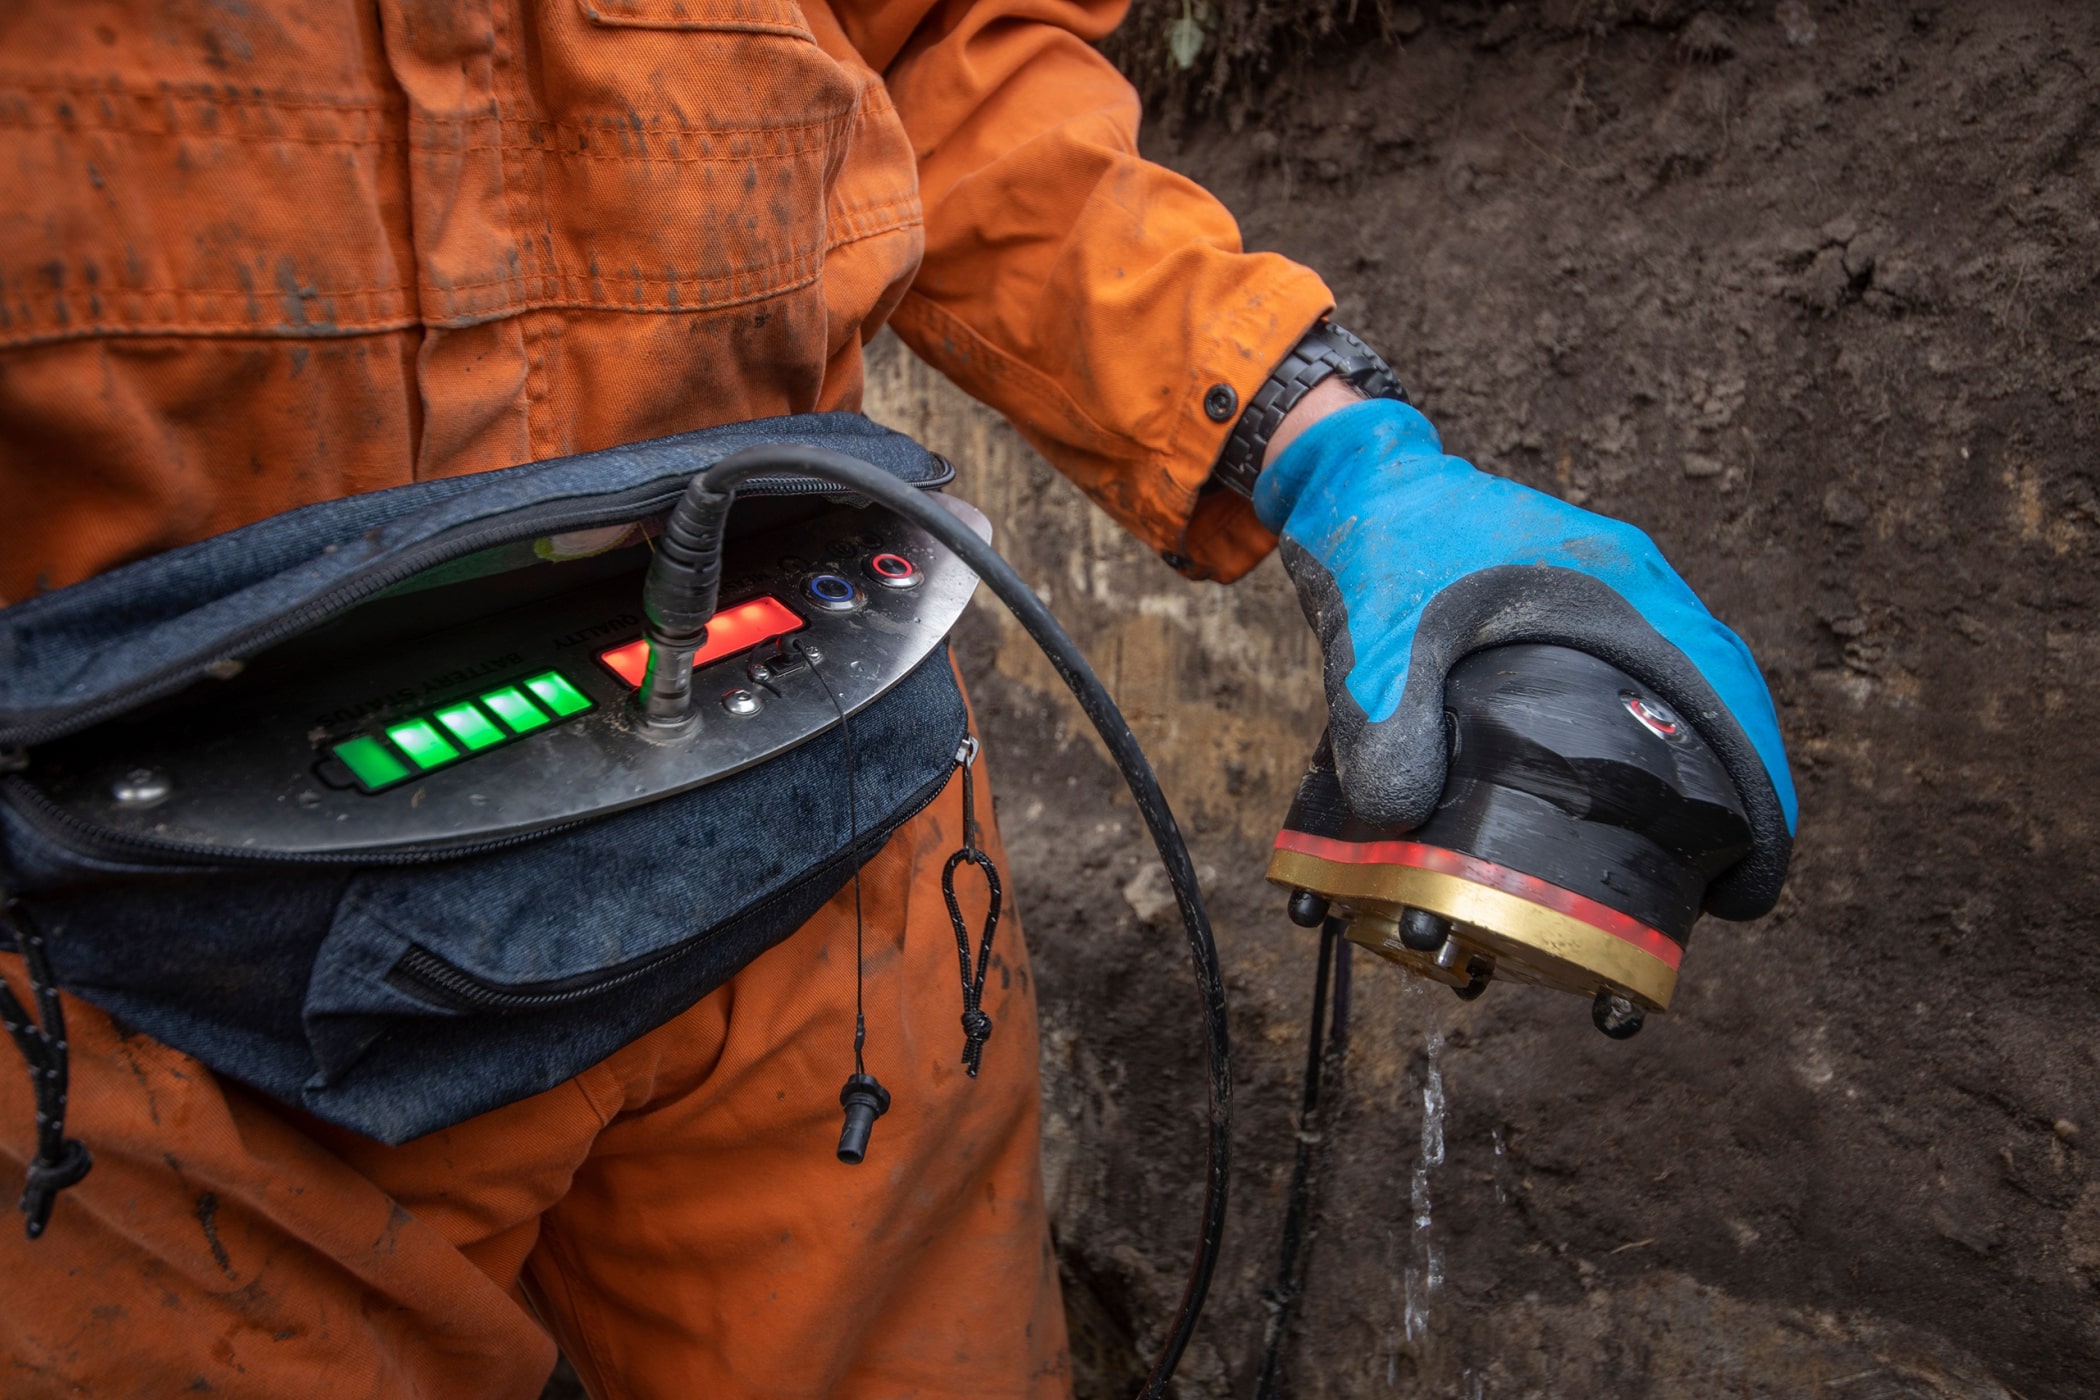 The Datalogger and Pipe Scanner used for offering pipeline inspection services